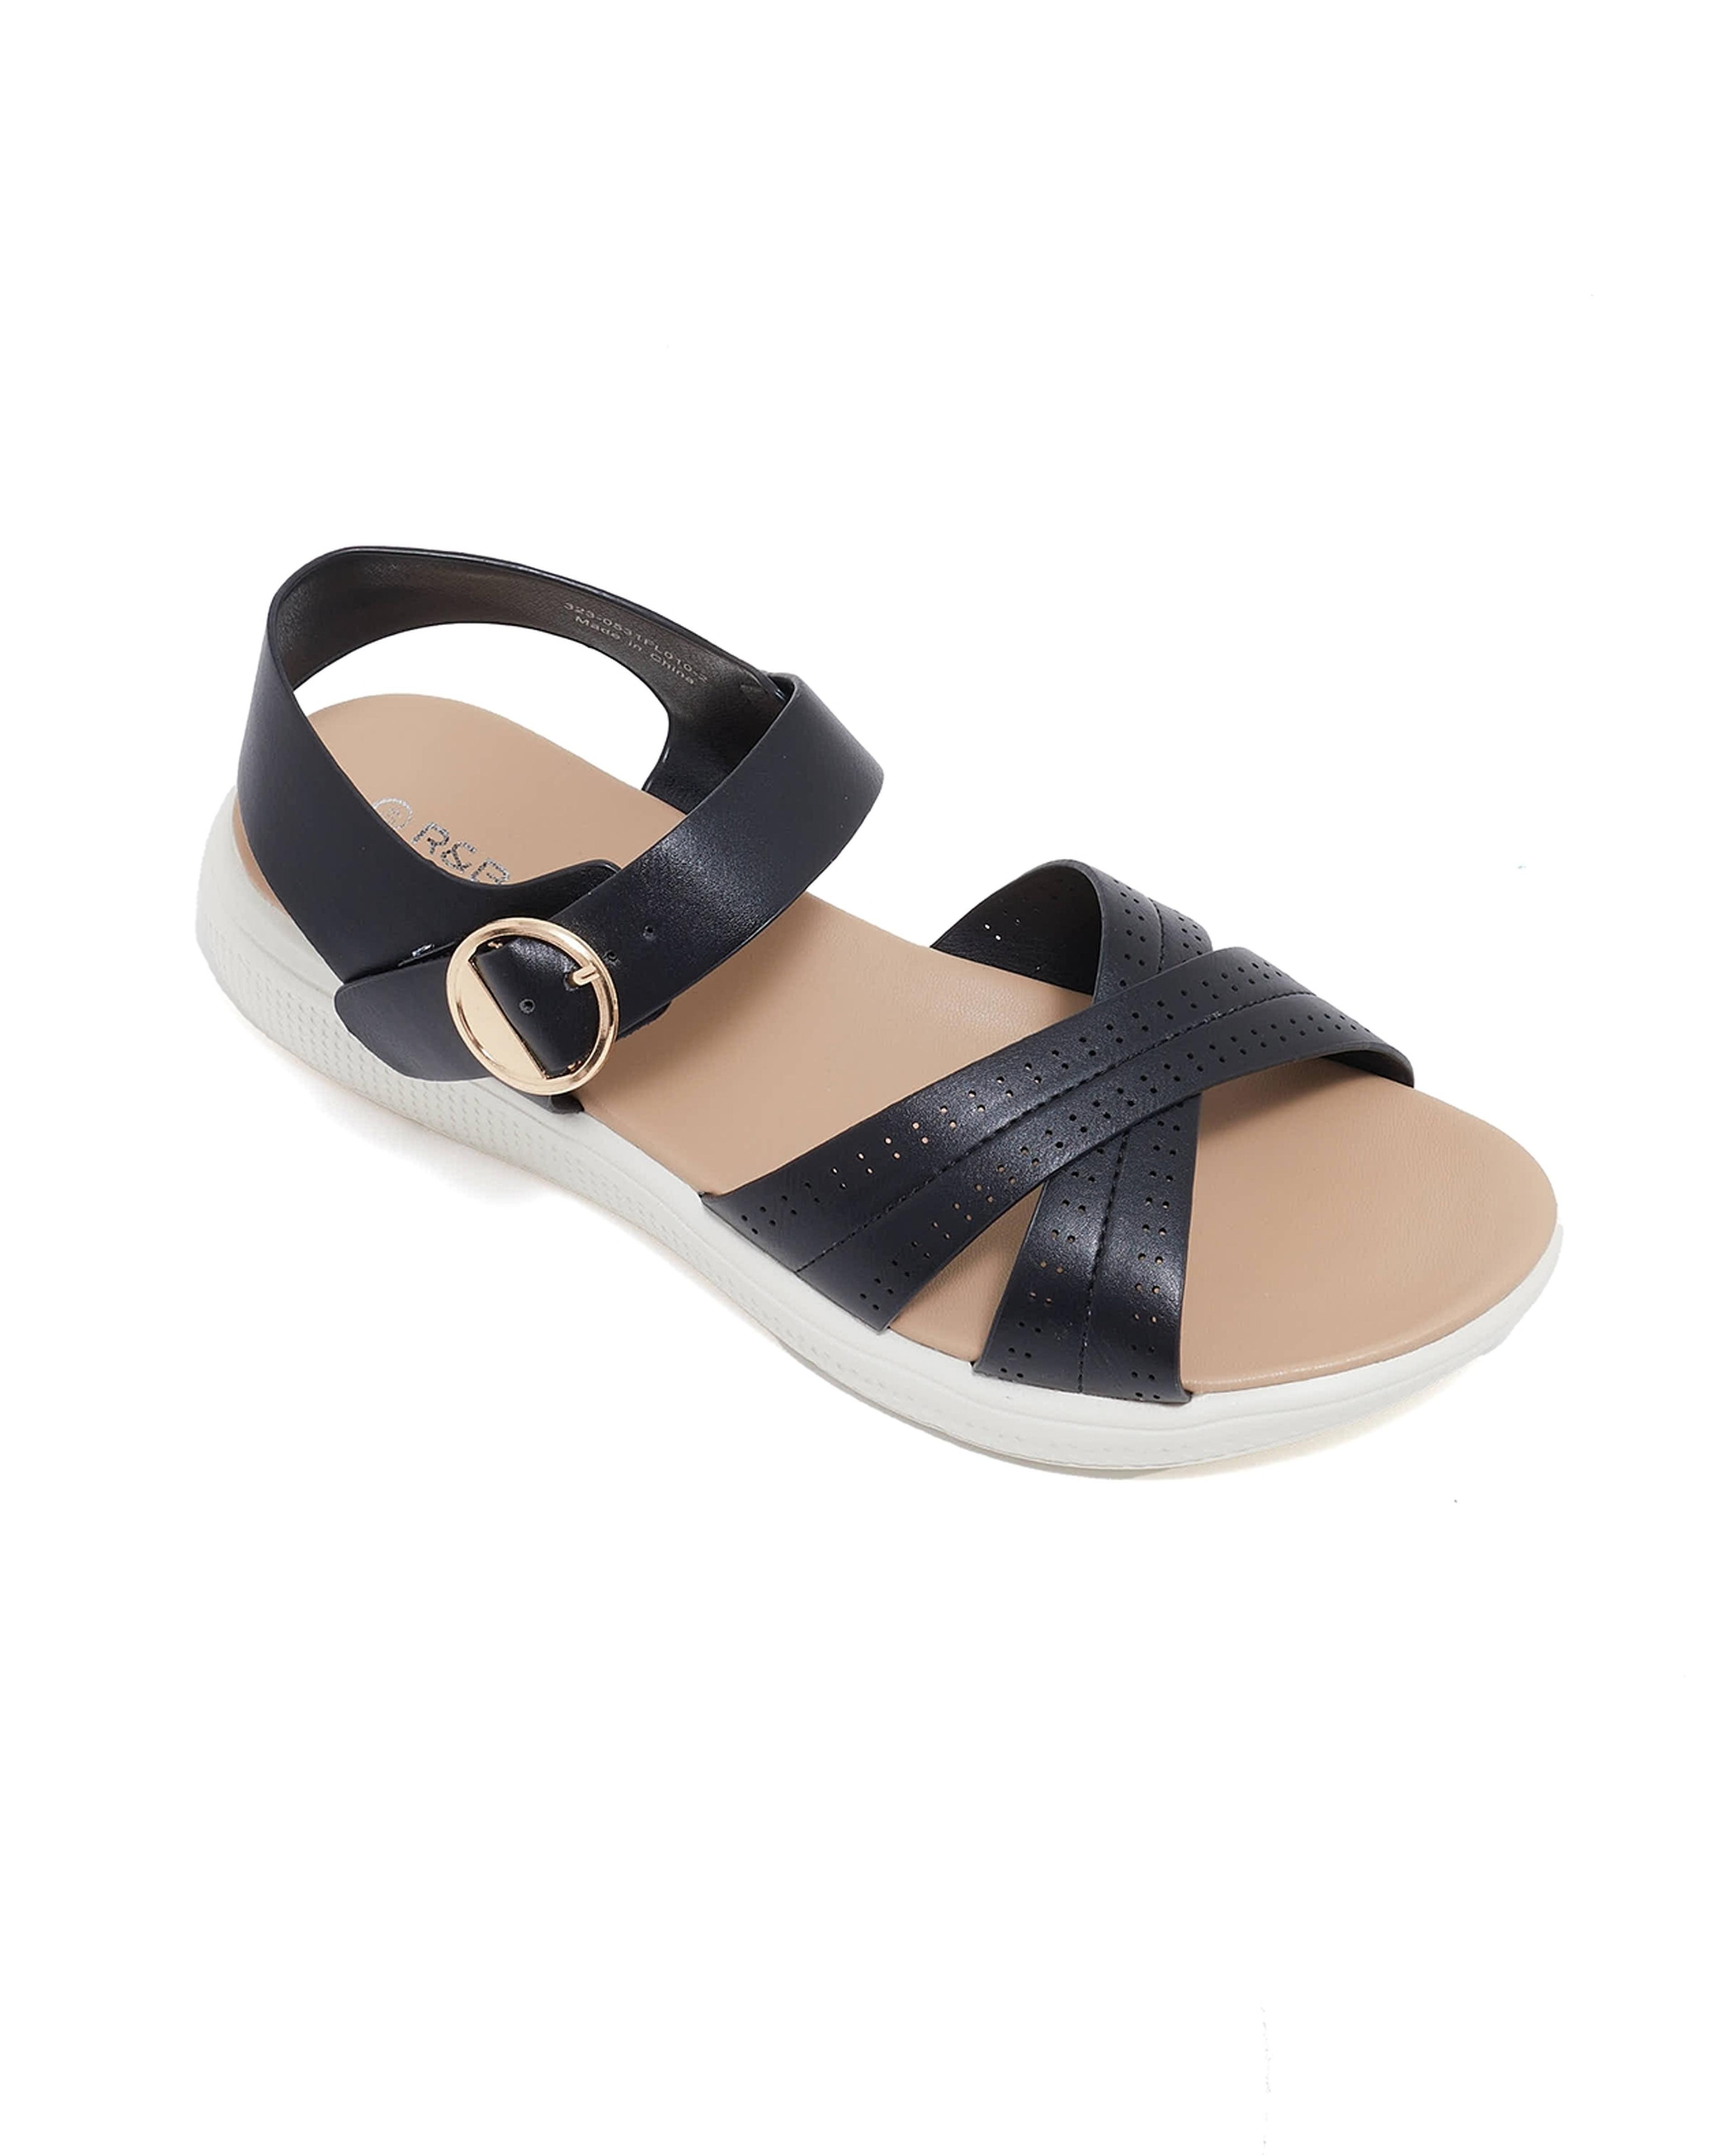 Strappy Buckle Closure Sandals